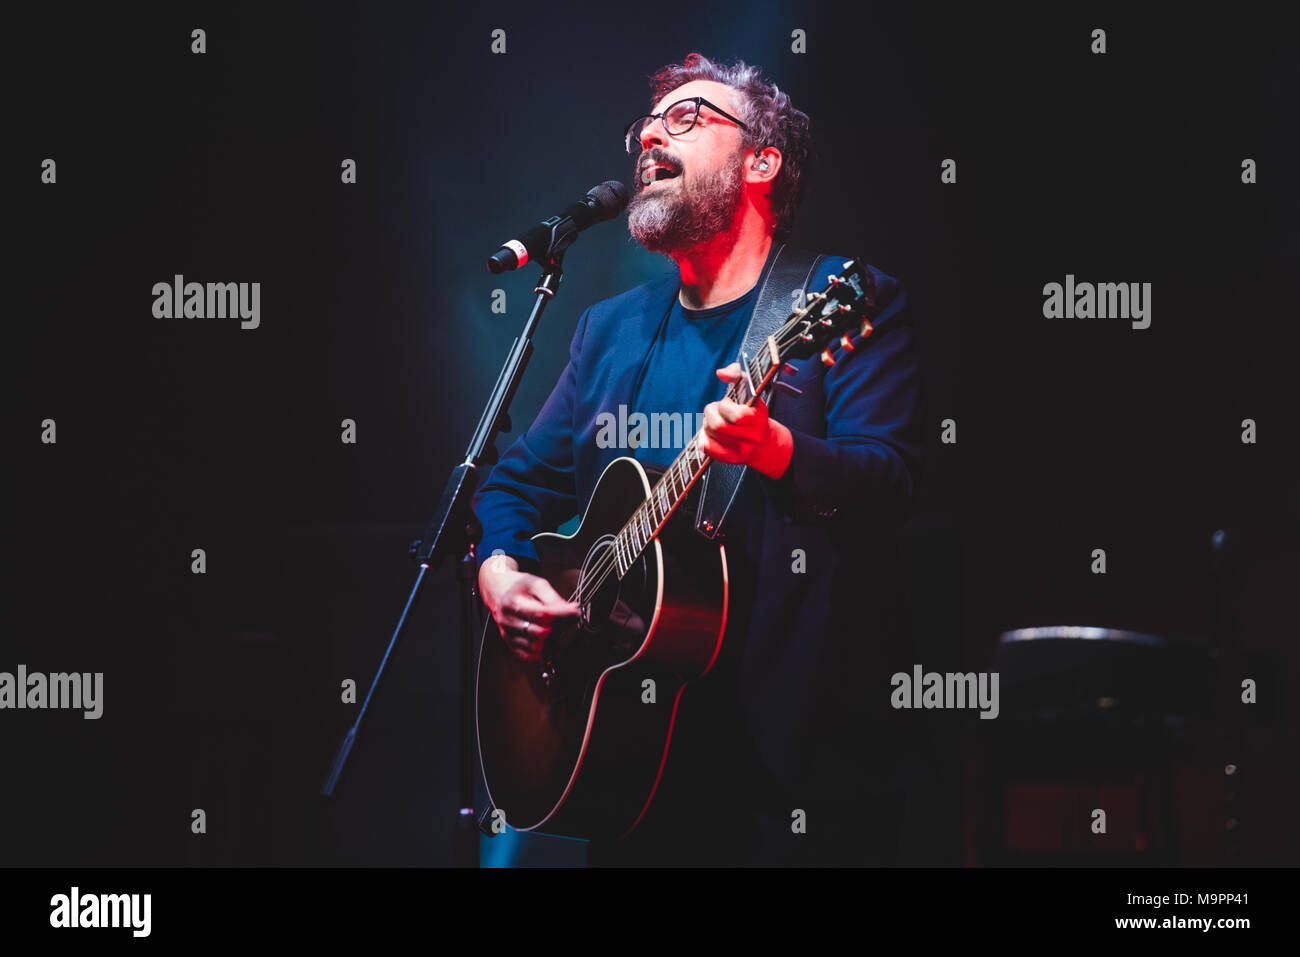 Turin, Italy. 27th Mar, 2018. The Italian singer and songwriter Dario Brunori, better known as Brunori SAS, performing live on stage at the Teatro Colosseo in Torino for his new 'Brunori a Teatro' (Brunori at the theater) tour 2018 Credit: Alessandro Bosio/Alamy Live News Stock Photo